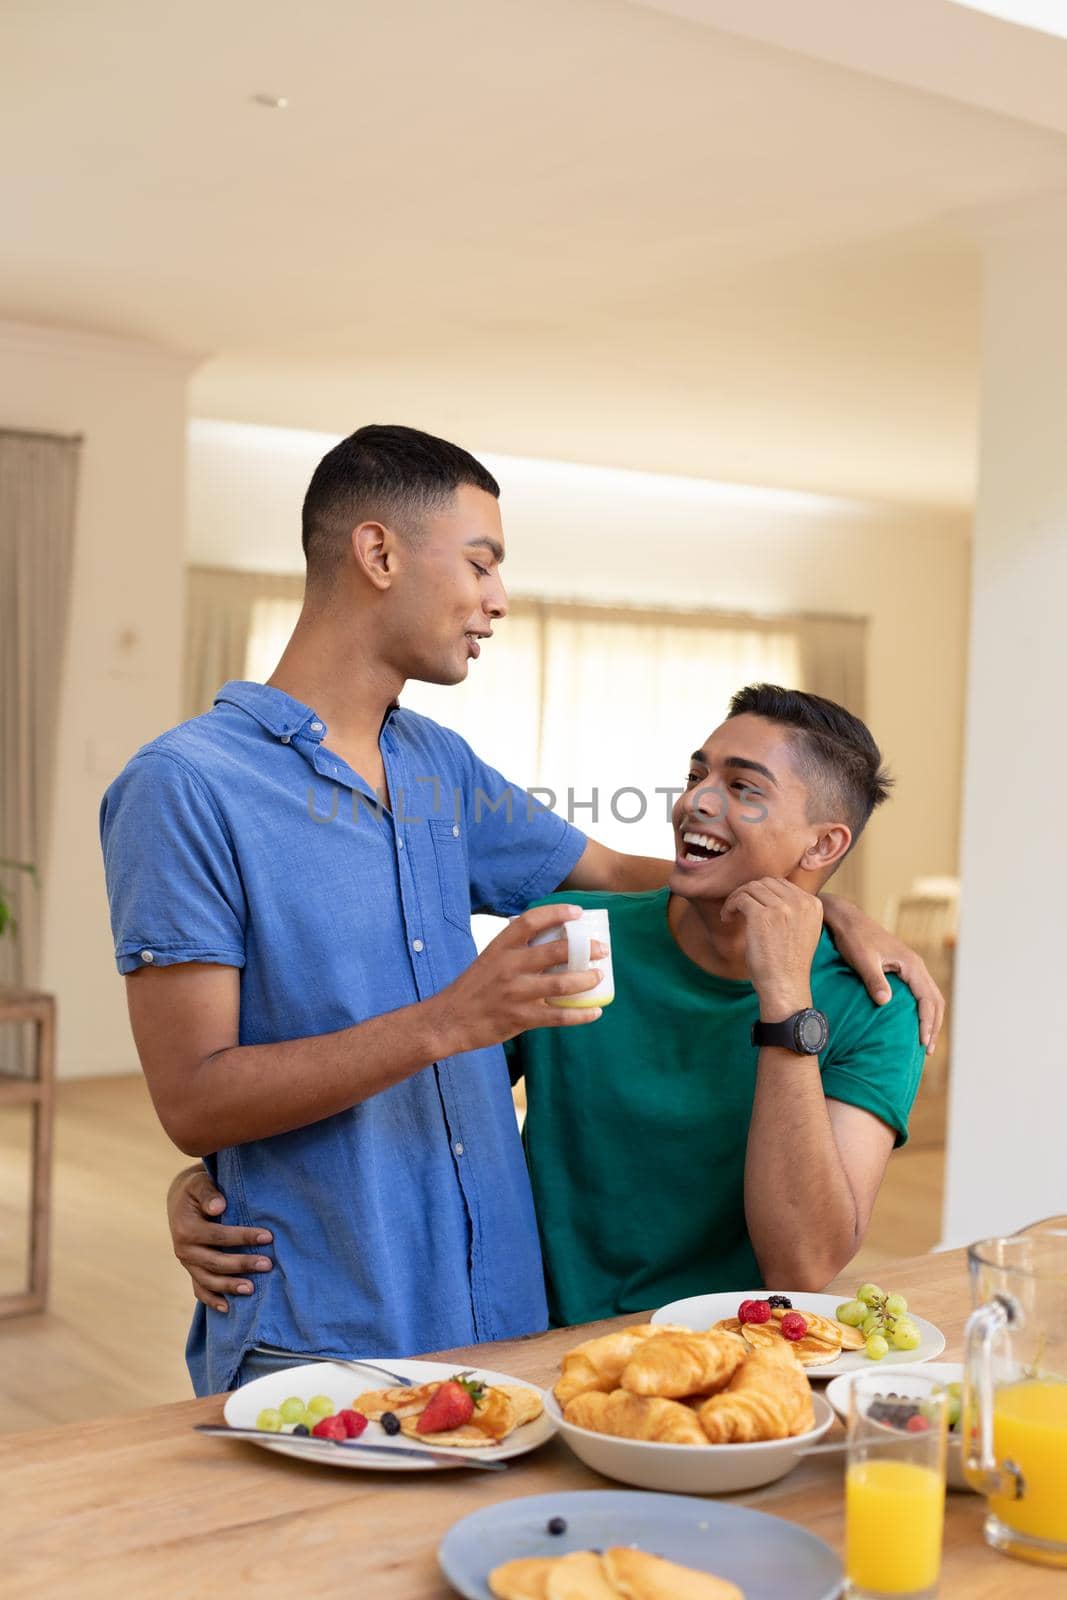 Diverse gay male couple sitting at table embracing by Wavebreakmedia